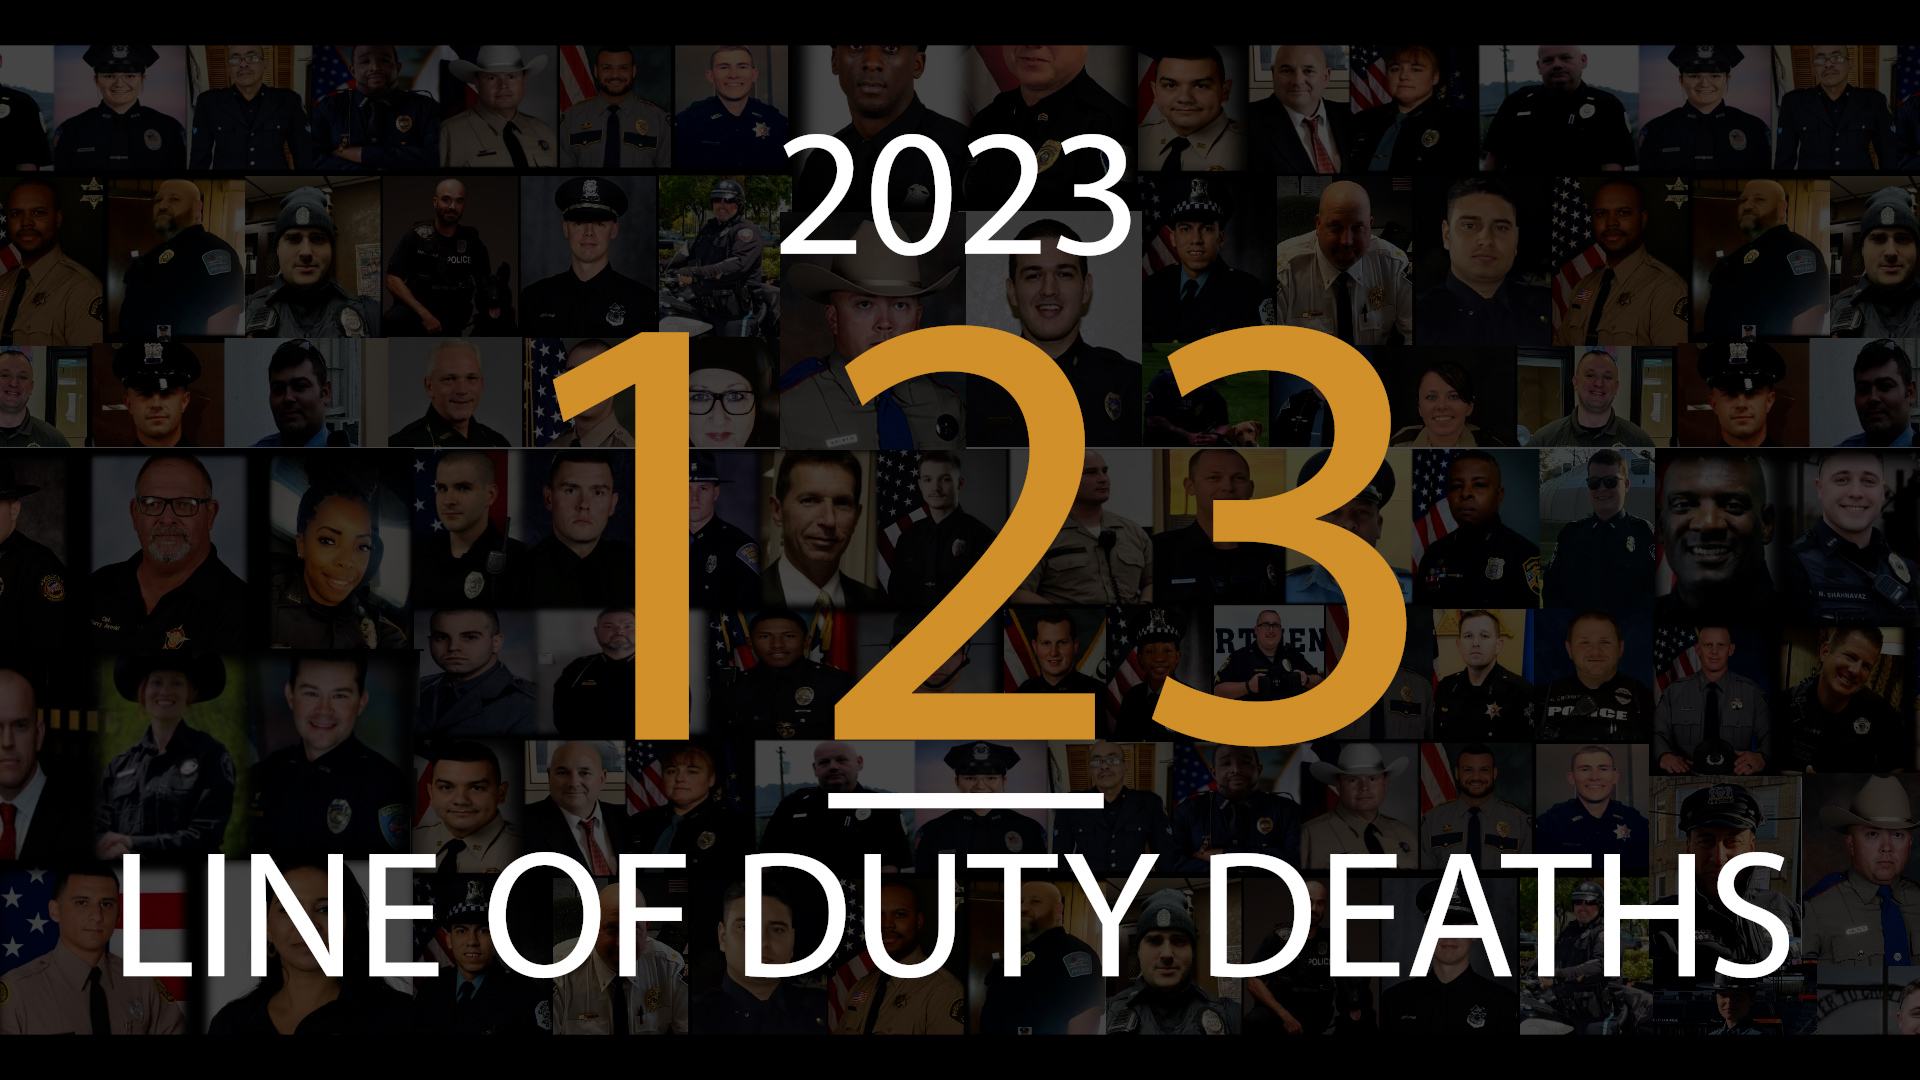 Line of Duty Deaths in 2023